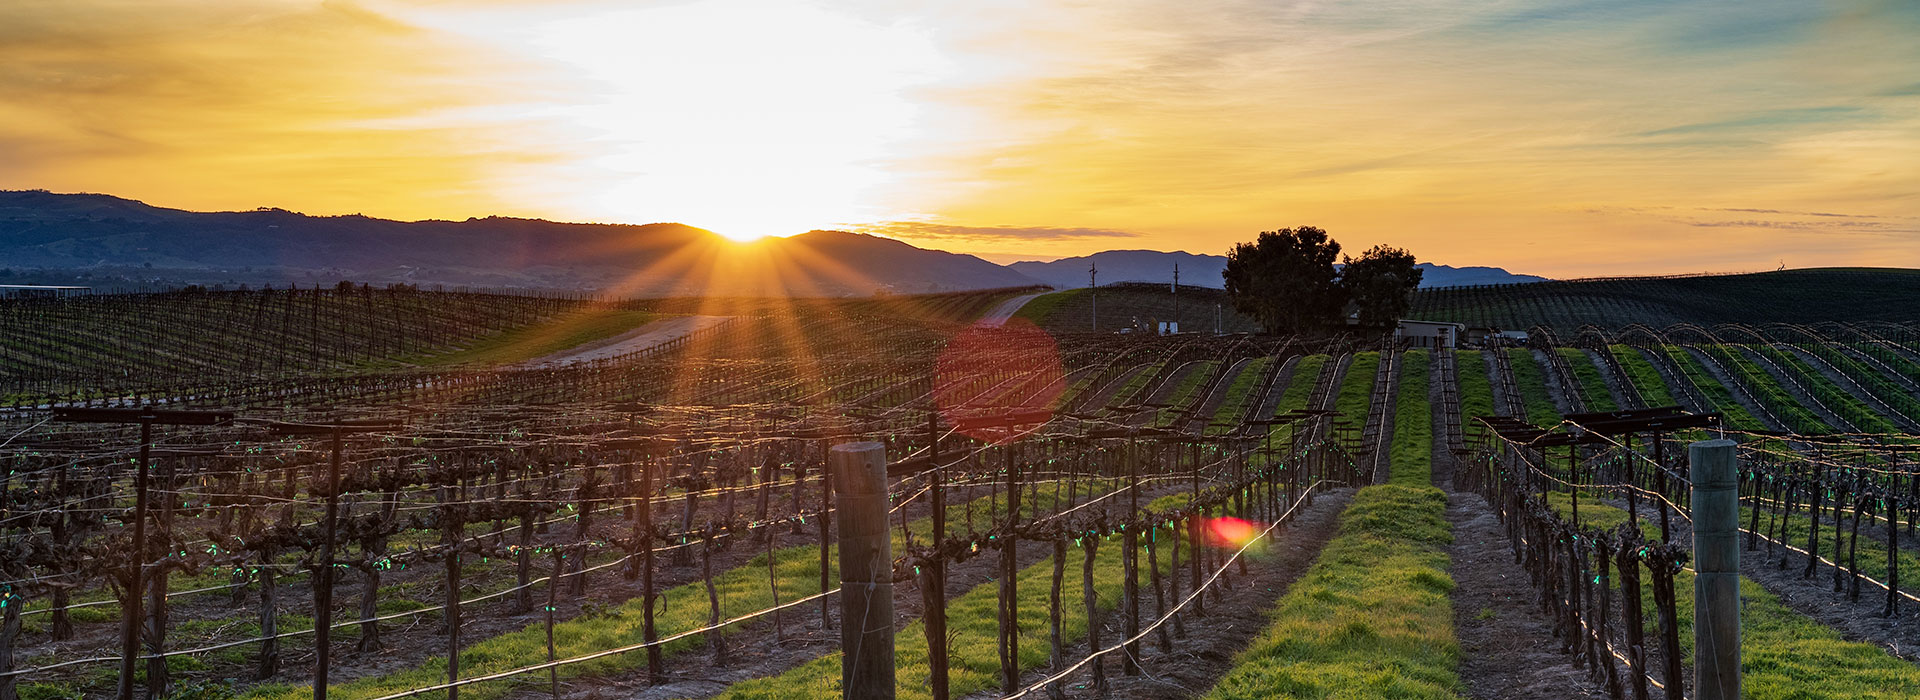 Winter vineyard with sun setting in the background